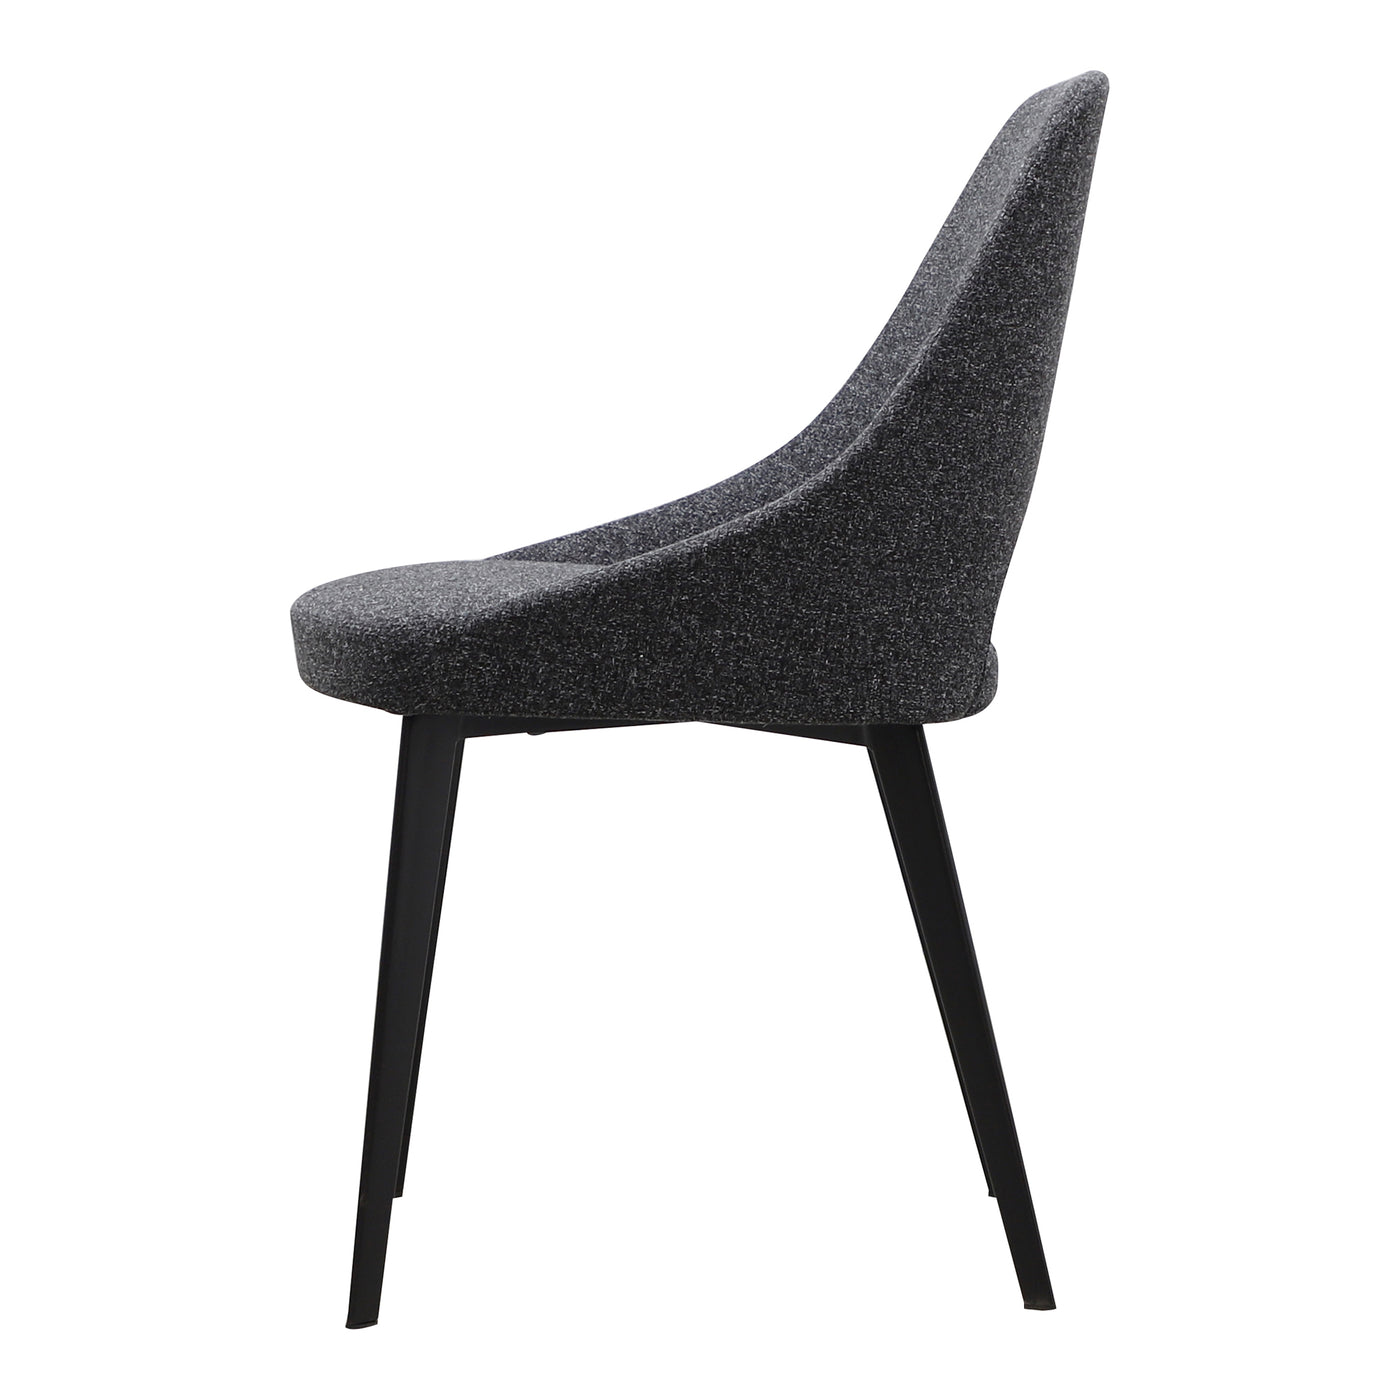 The Tizz dining chair is an elegant addition to the dining area, its gently curving silhouette and slender steel legs comi...